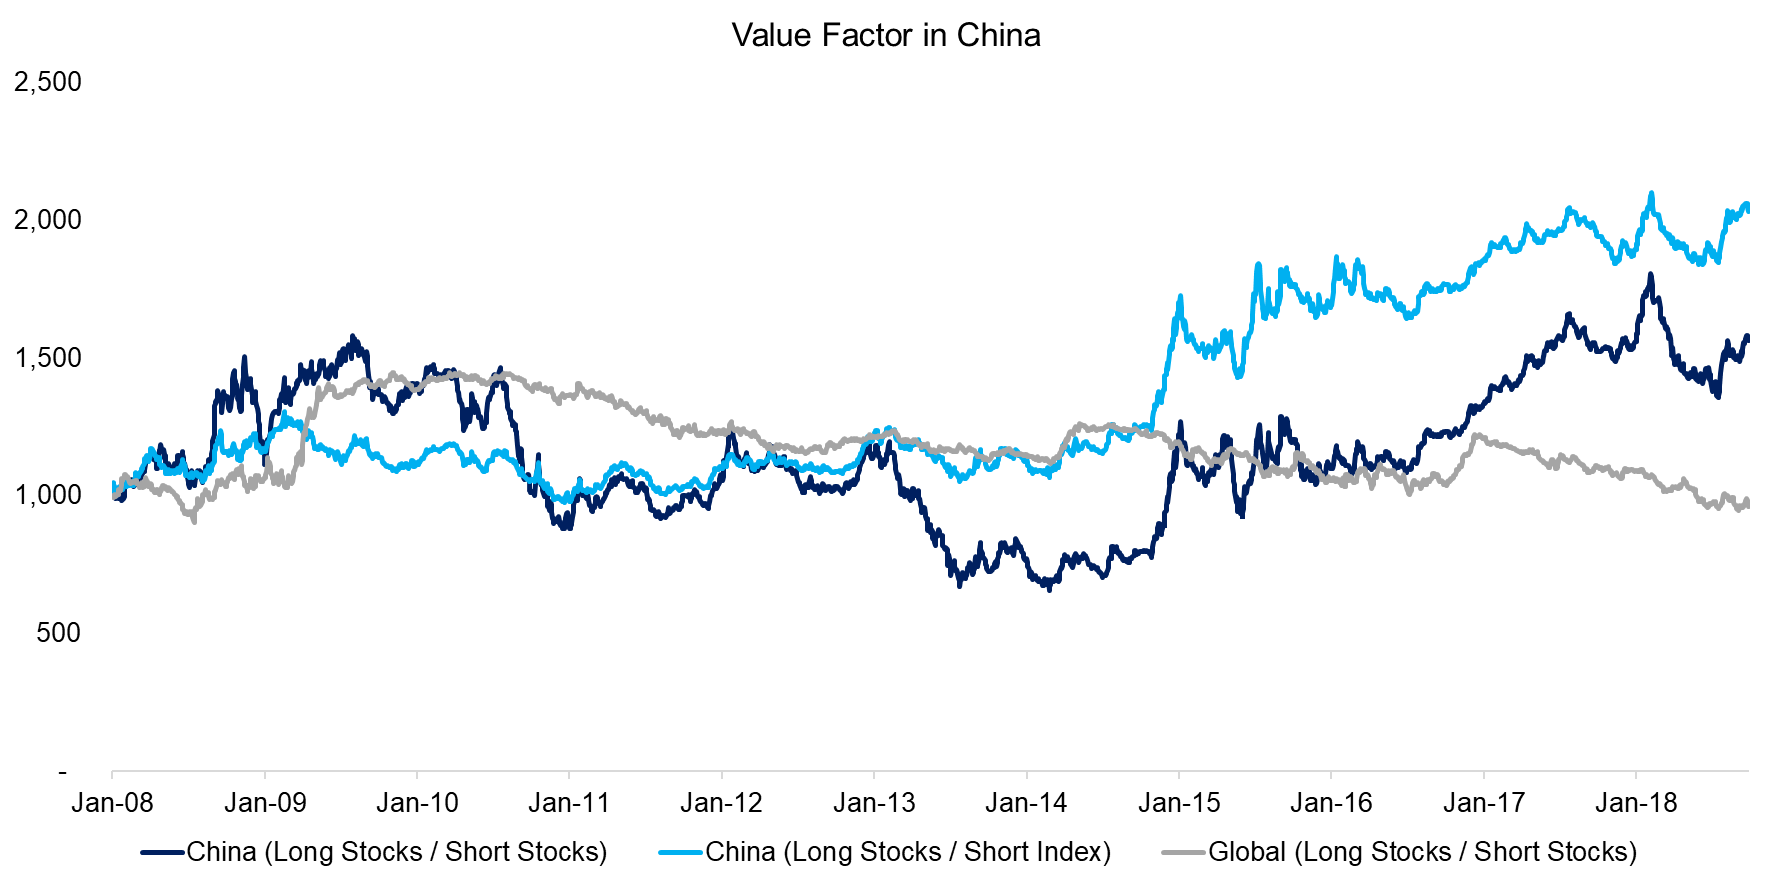 Value Factor in China